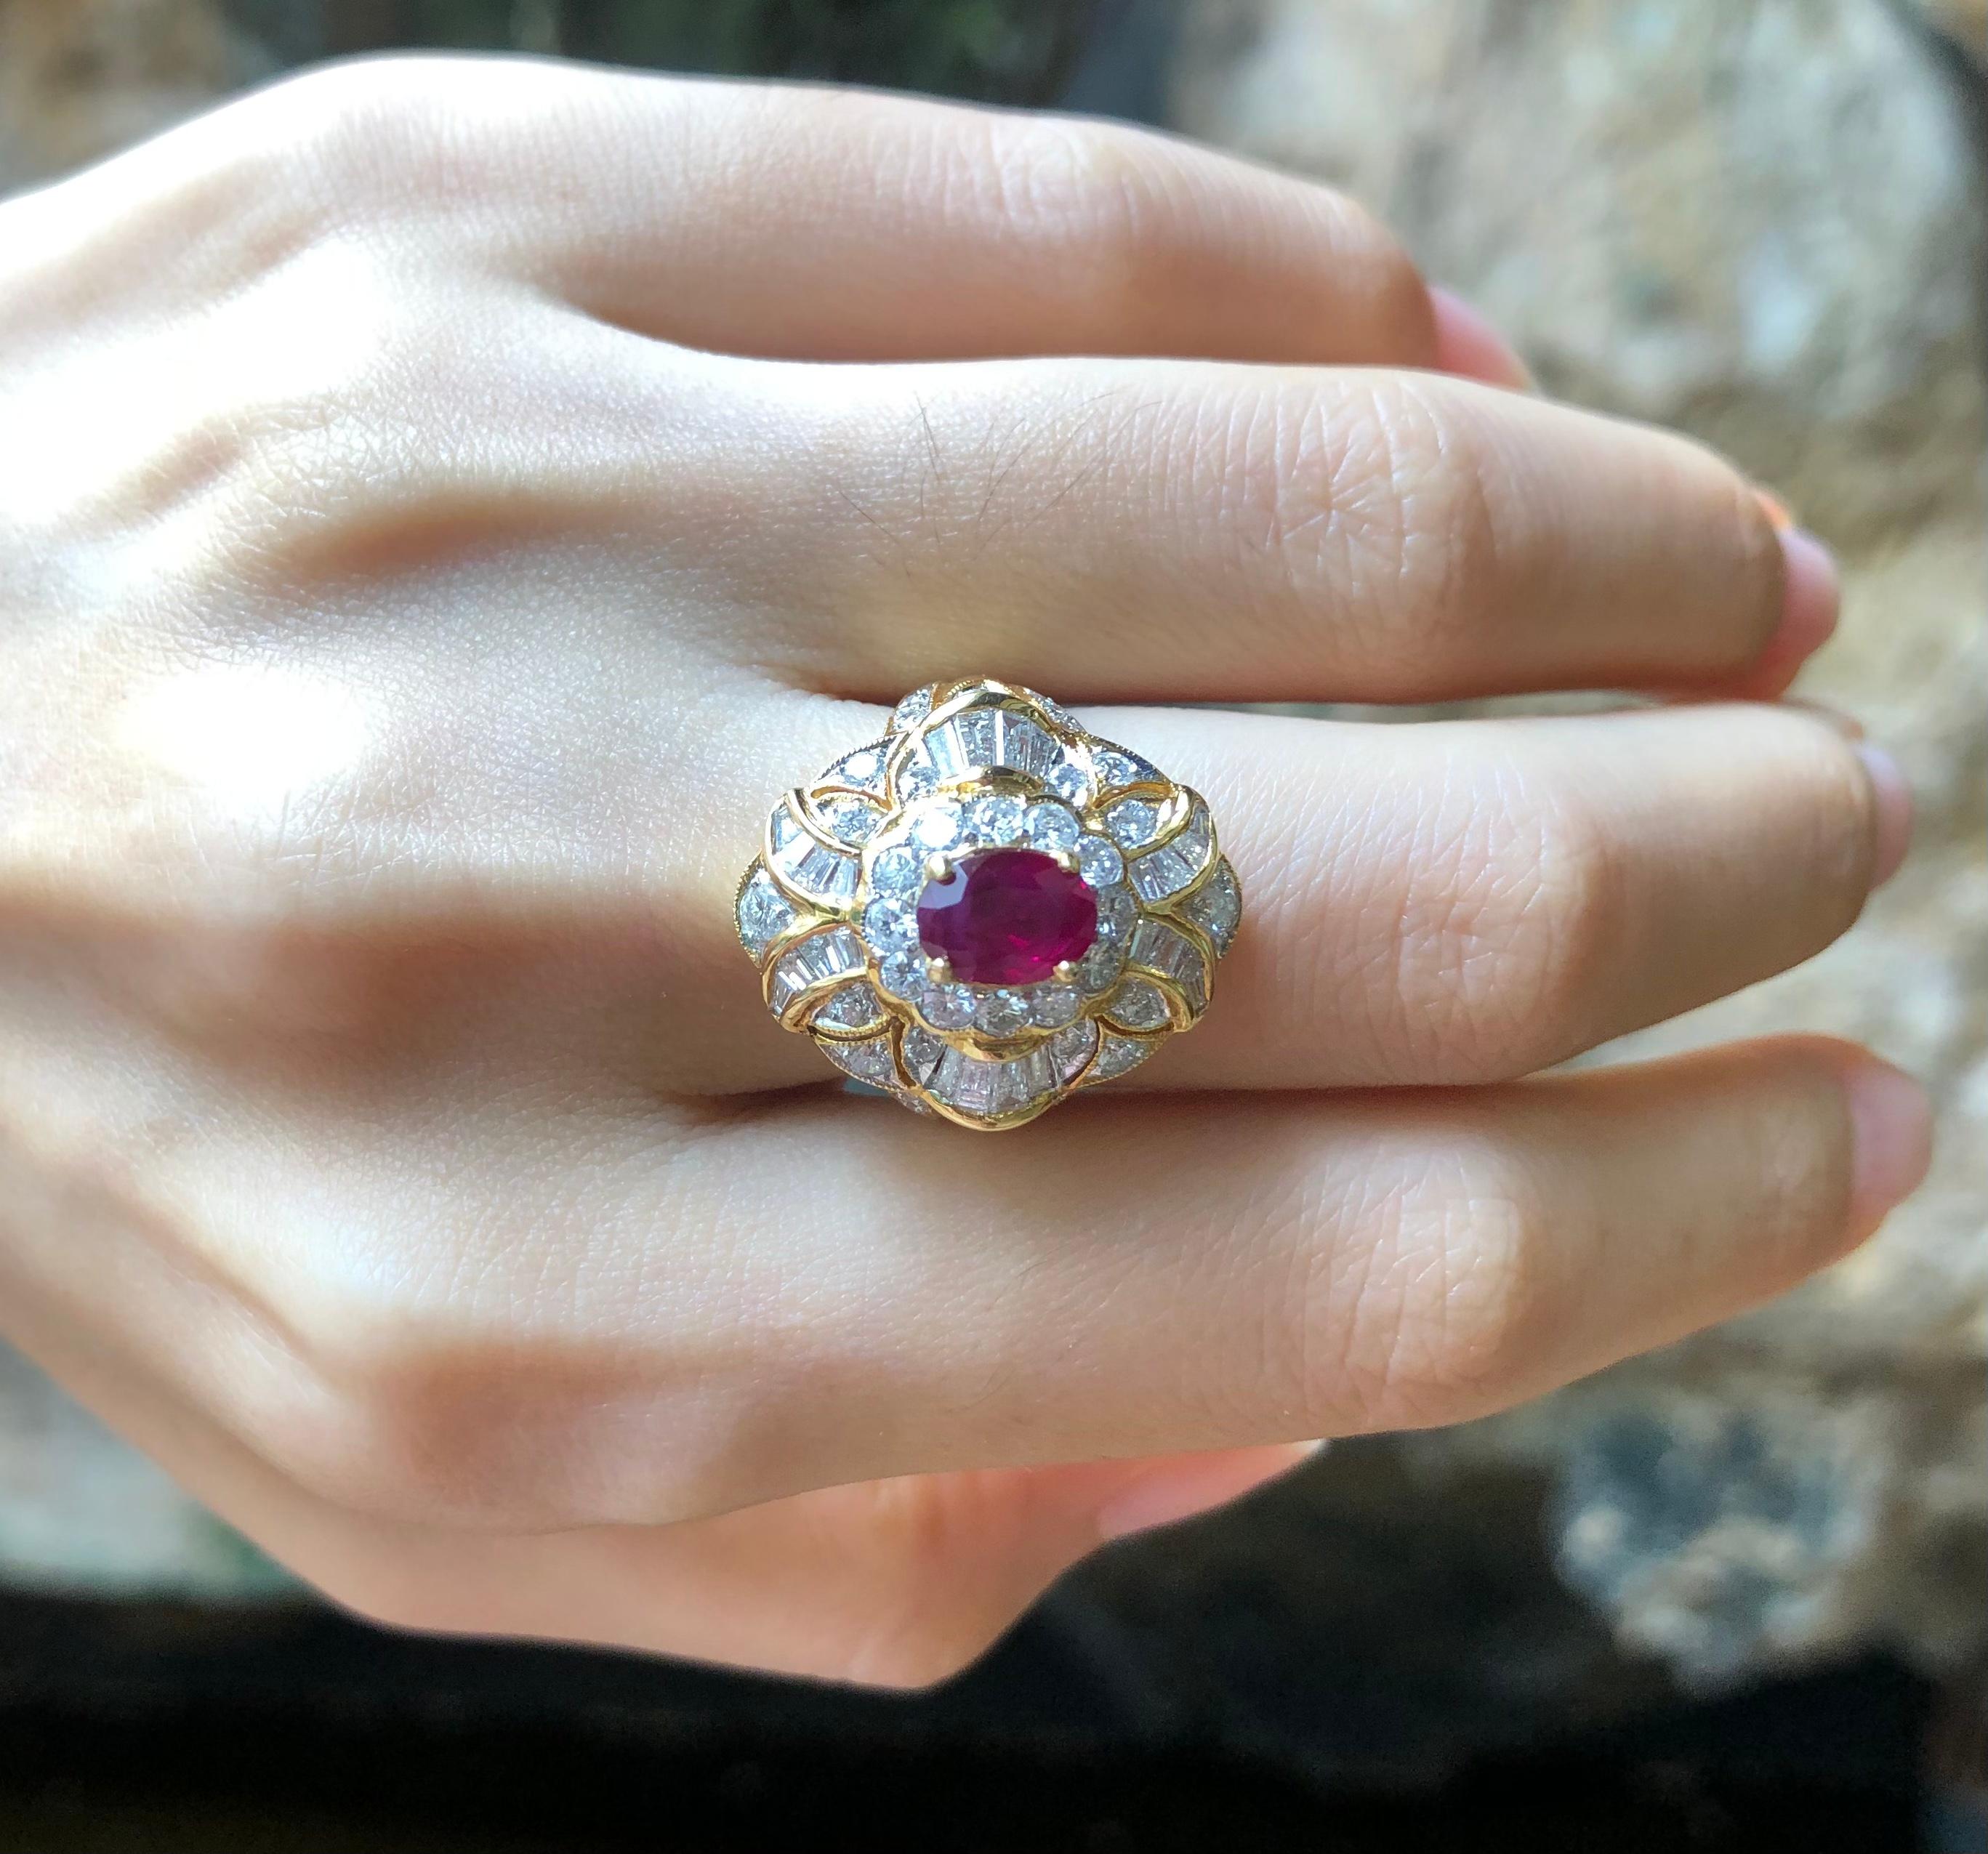 Ruby 1.21 carats with Diamond 1.20 carats Ring set in 18 Karat Gold Settings

Width:  1.4 cm 
Length:  2.2 cm
Ring Size: 52
Total Weight: 8.91 grams

